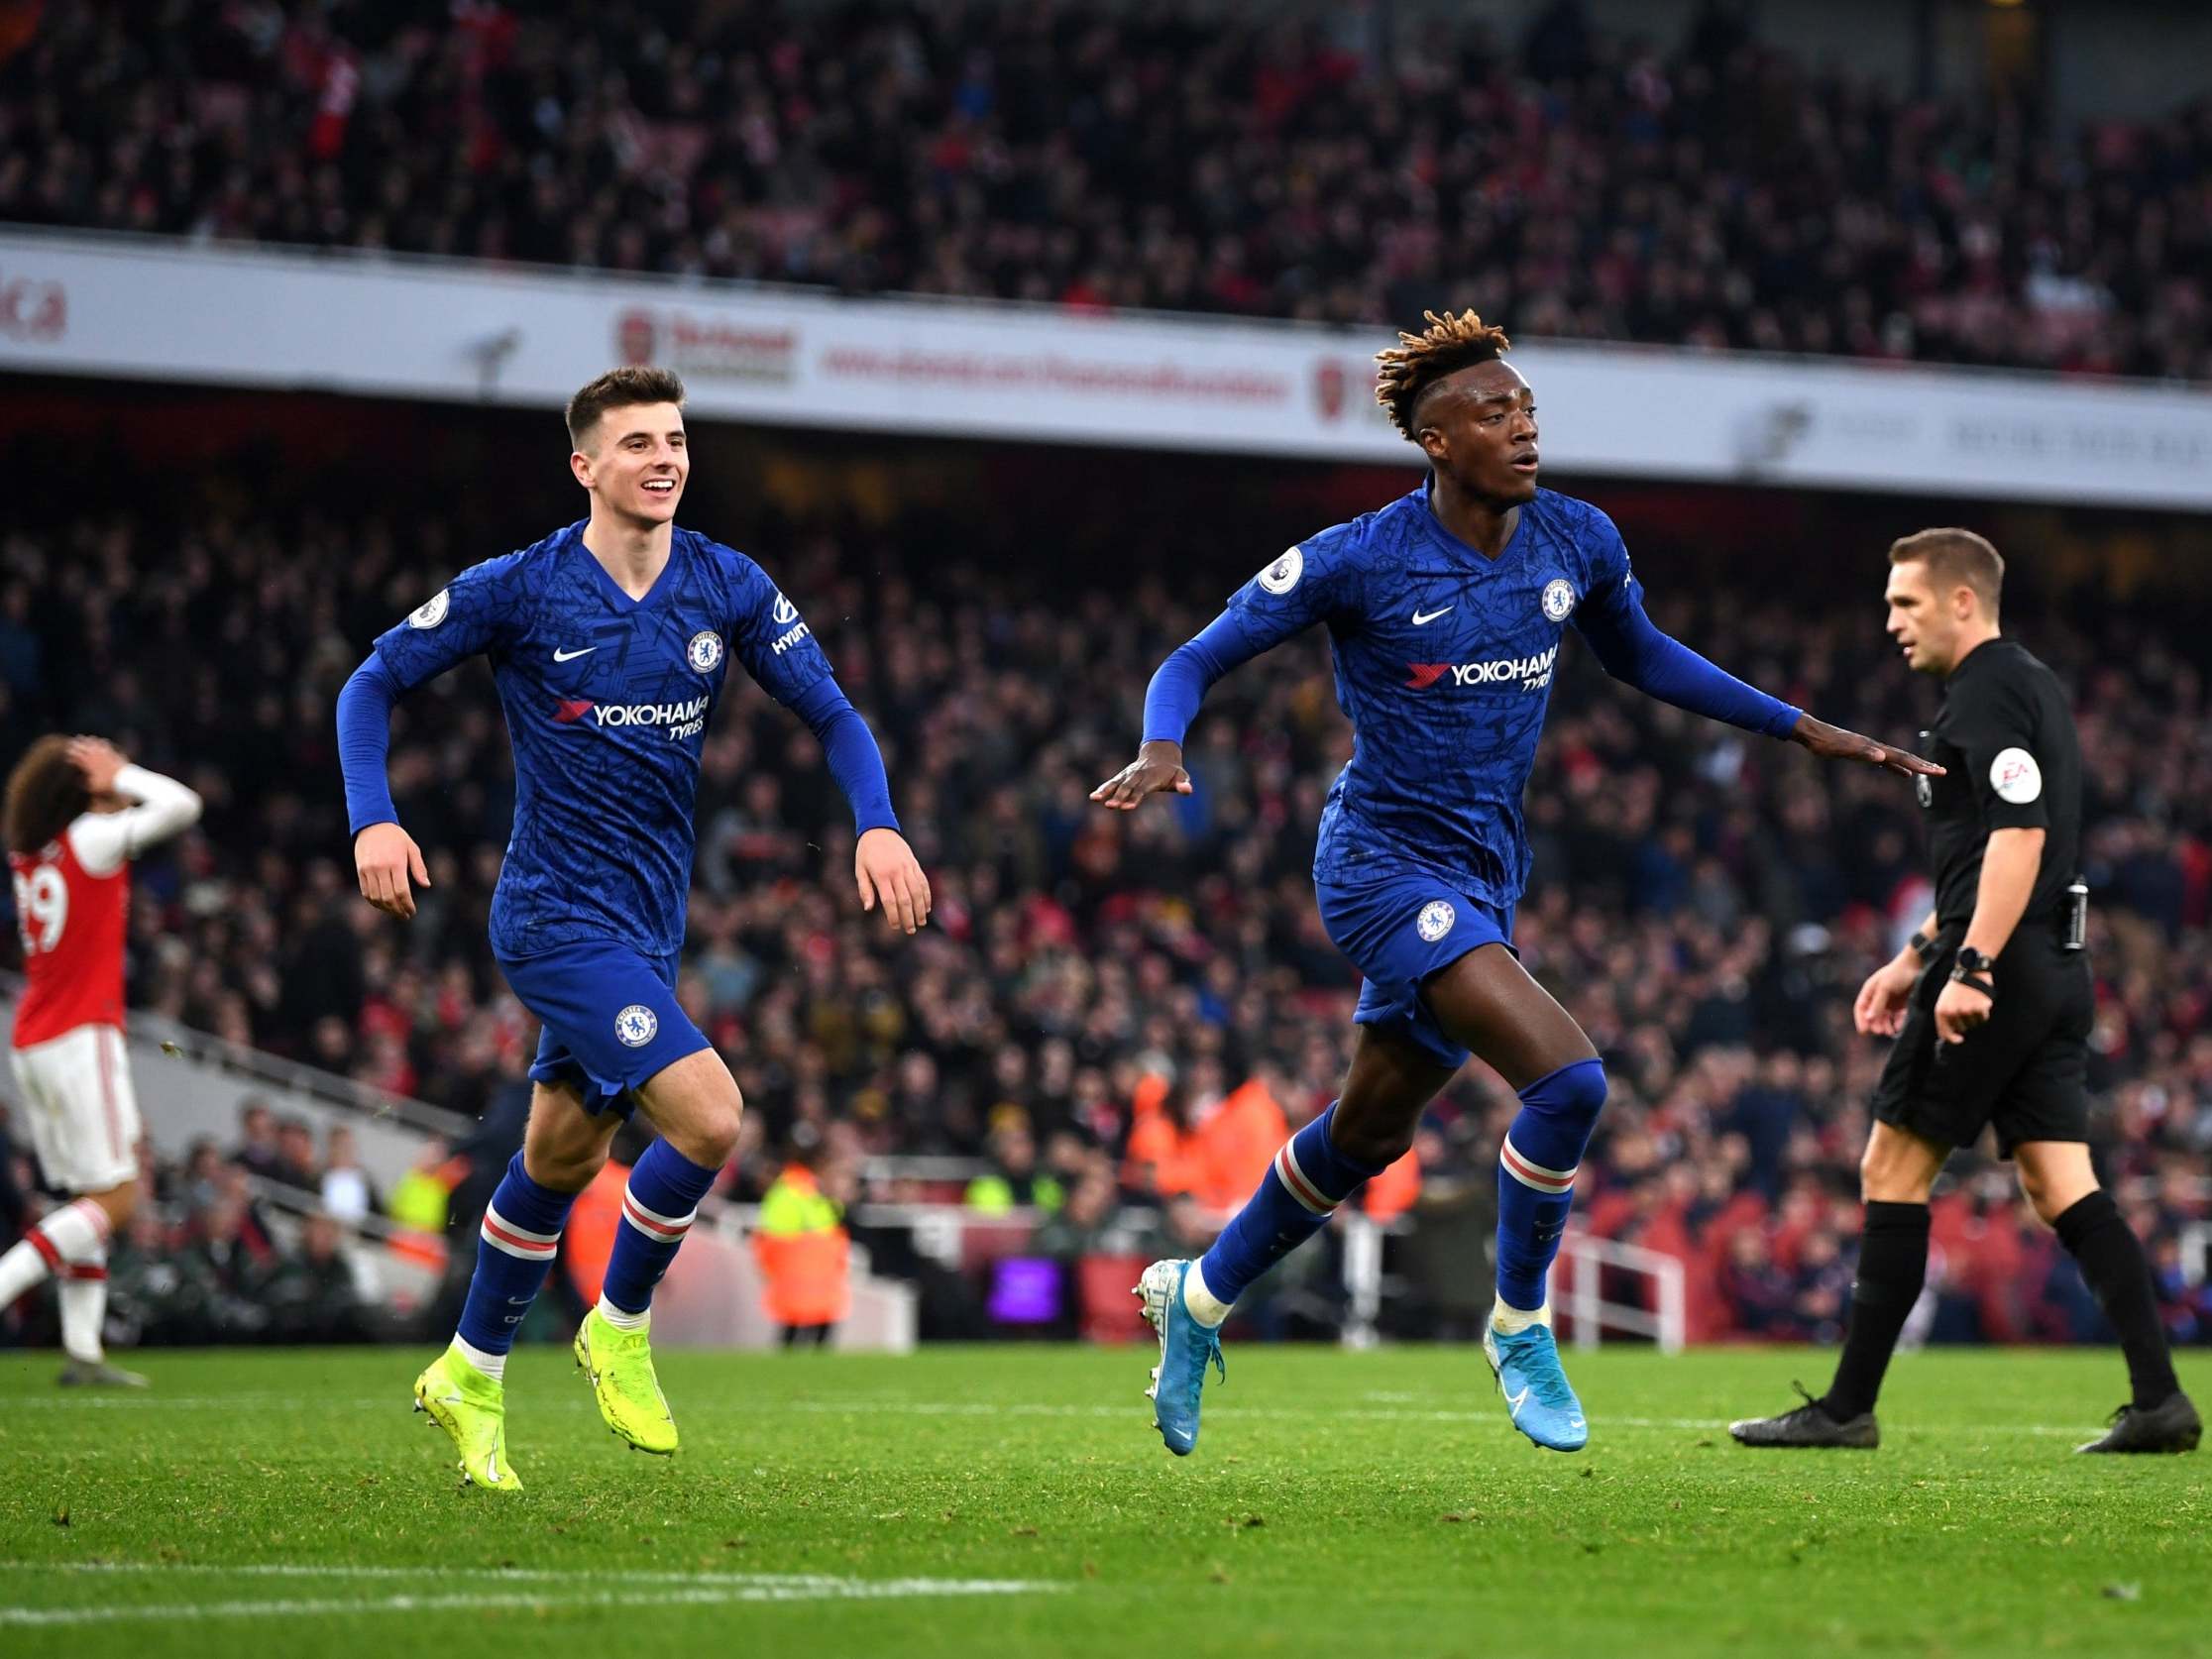 Arsenal vs Chelsea LIVE: Result, final score and reaction today | The Independent